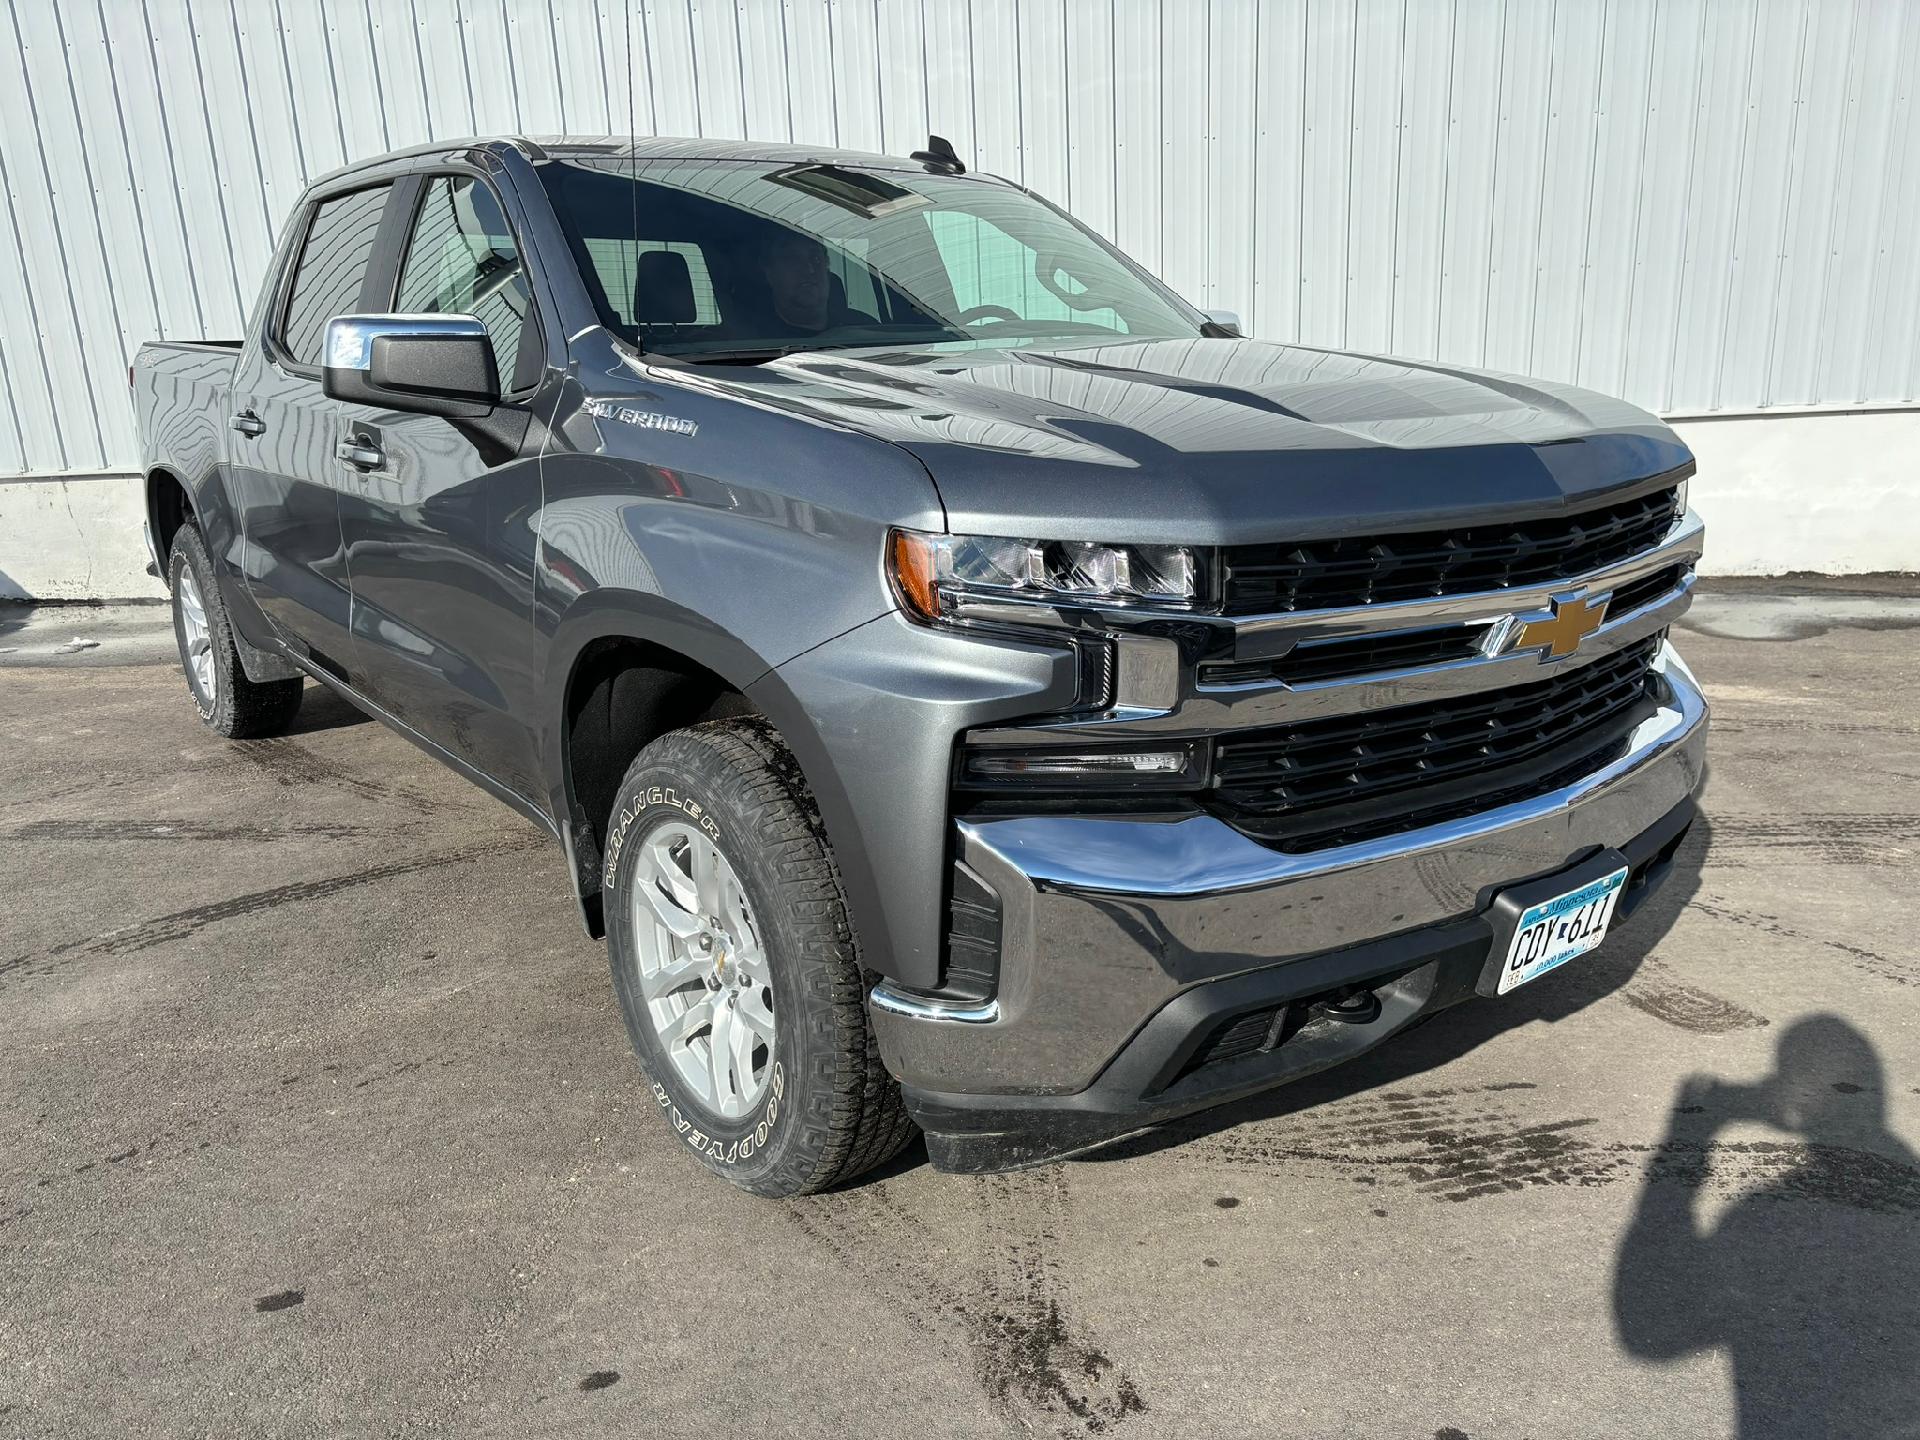 Used 2019 Chevrolet Silverado 1500 LT with VIN 1GCUYDED0KZ239611 for sale in Red Lake Falls, Minnesota